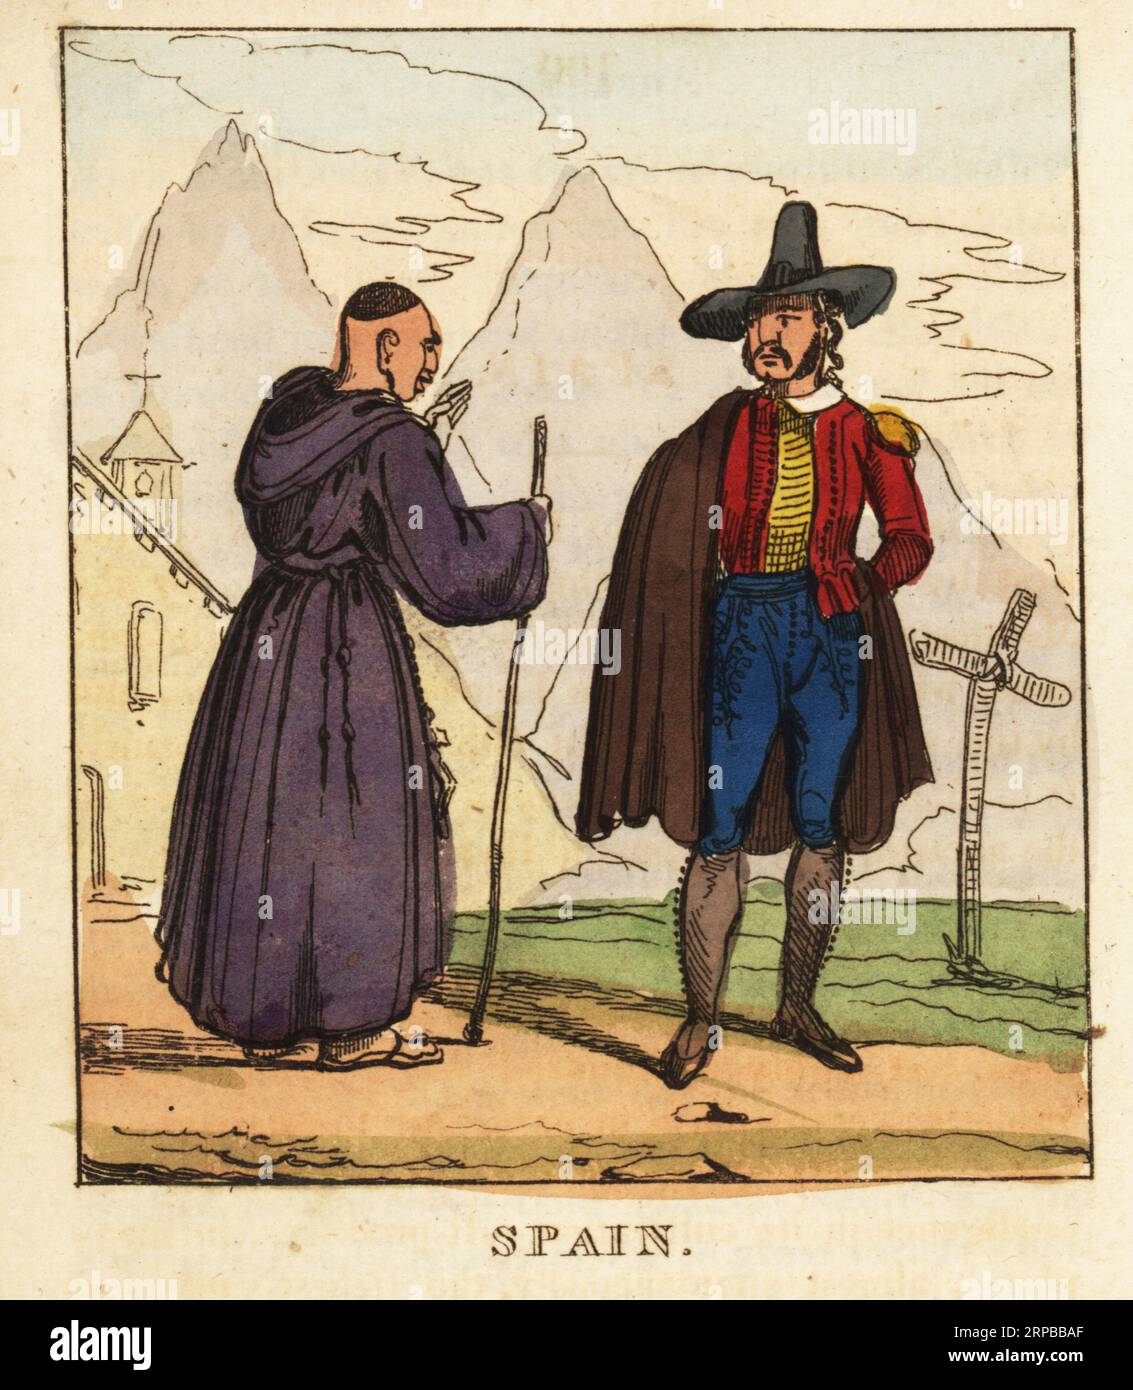 Costumes of Spain, 19th century. Spanish monk in habit and sandals with staff on a pilgrimage. Gentleman in wide-brim hat, cape, jacket with epaulettes, breeches and gaiters. Spain.  Handcoloured copperplate engraving from The World in Miniature, or Panorama of the Costumes, Manners & Customs of All Nations, John Bysh, London, 1825. Stock Photo